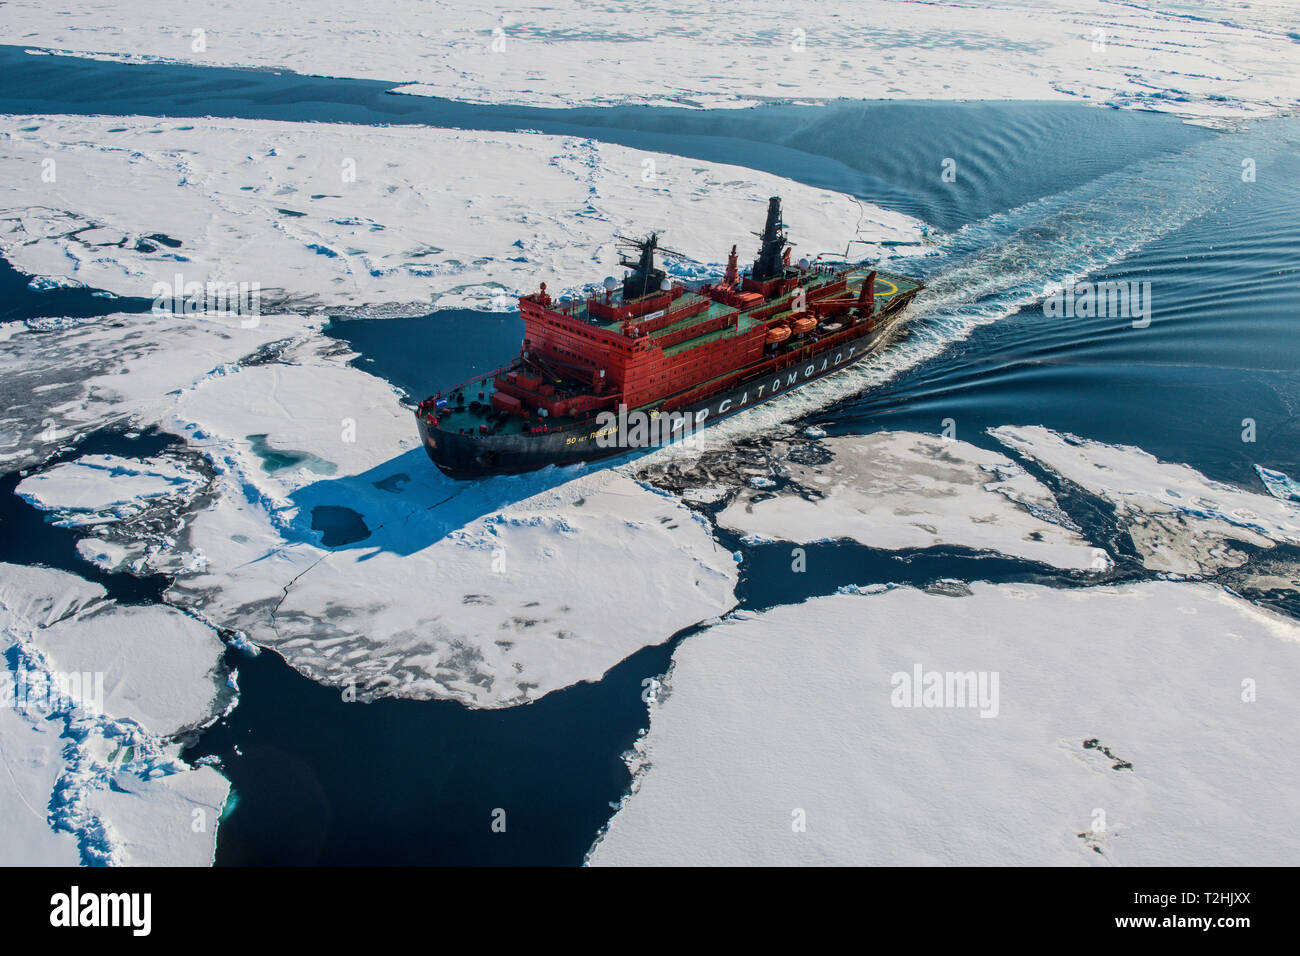 Aerial of the Icebreaker '50 years of victory' on its way to the North Pole, Arctic Stock Photo